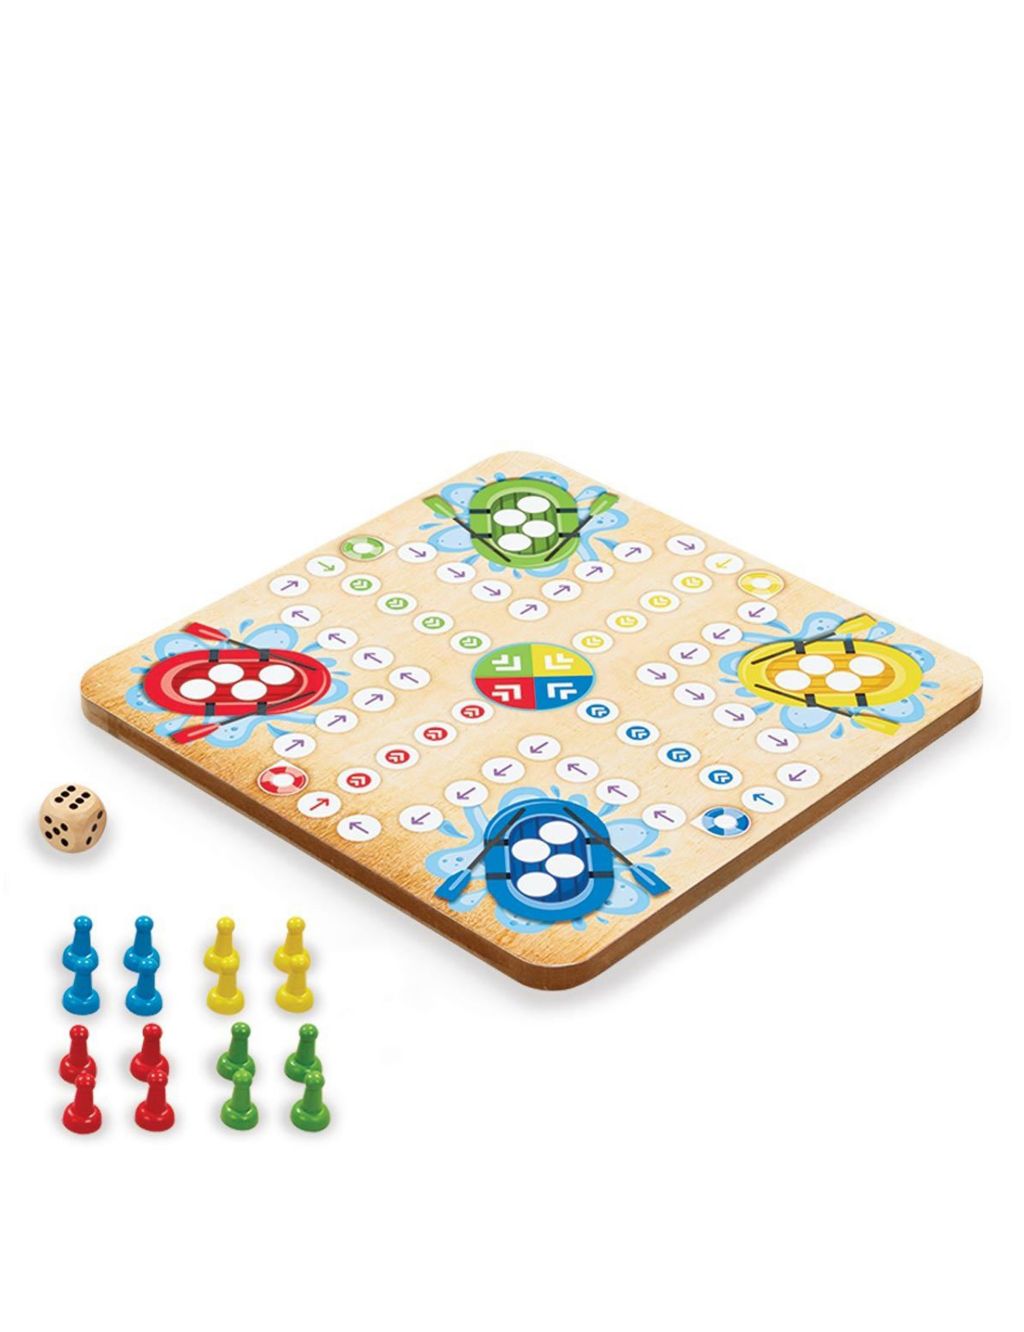 Snakes 'n' Ladders & Ludo Game (4+ Yrs) 1 of 3